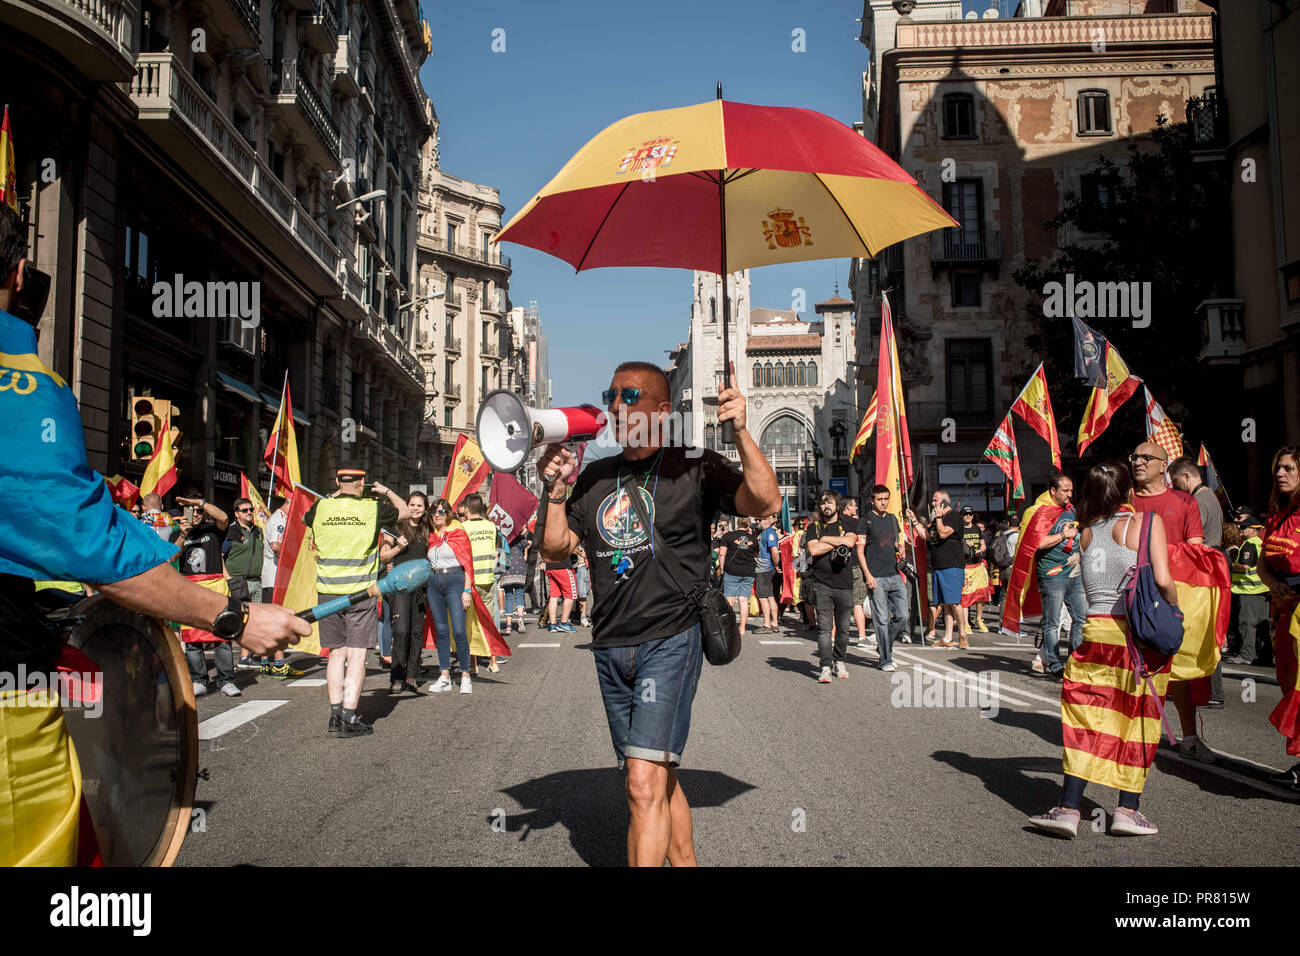 Barcelona, Catalonia, Spain. 29th Sep, 2018. A man carrying and umbrella with the spanish flag colors shouts slogans during a Spanish police demonstration in Barcelona. Members and supporters of Spanish police Guardia Civil and Policia Nacional marched by Barcelona streets demanding salary improvements and in tribute to the participation against the Catalan referendum of independence a year ago. Credit: Jordi Boixareu/ZUMA Wire/Alamy Live News Stock Photo